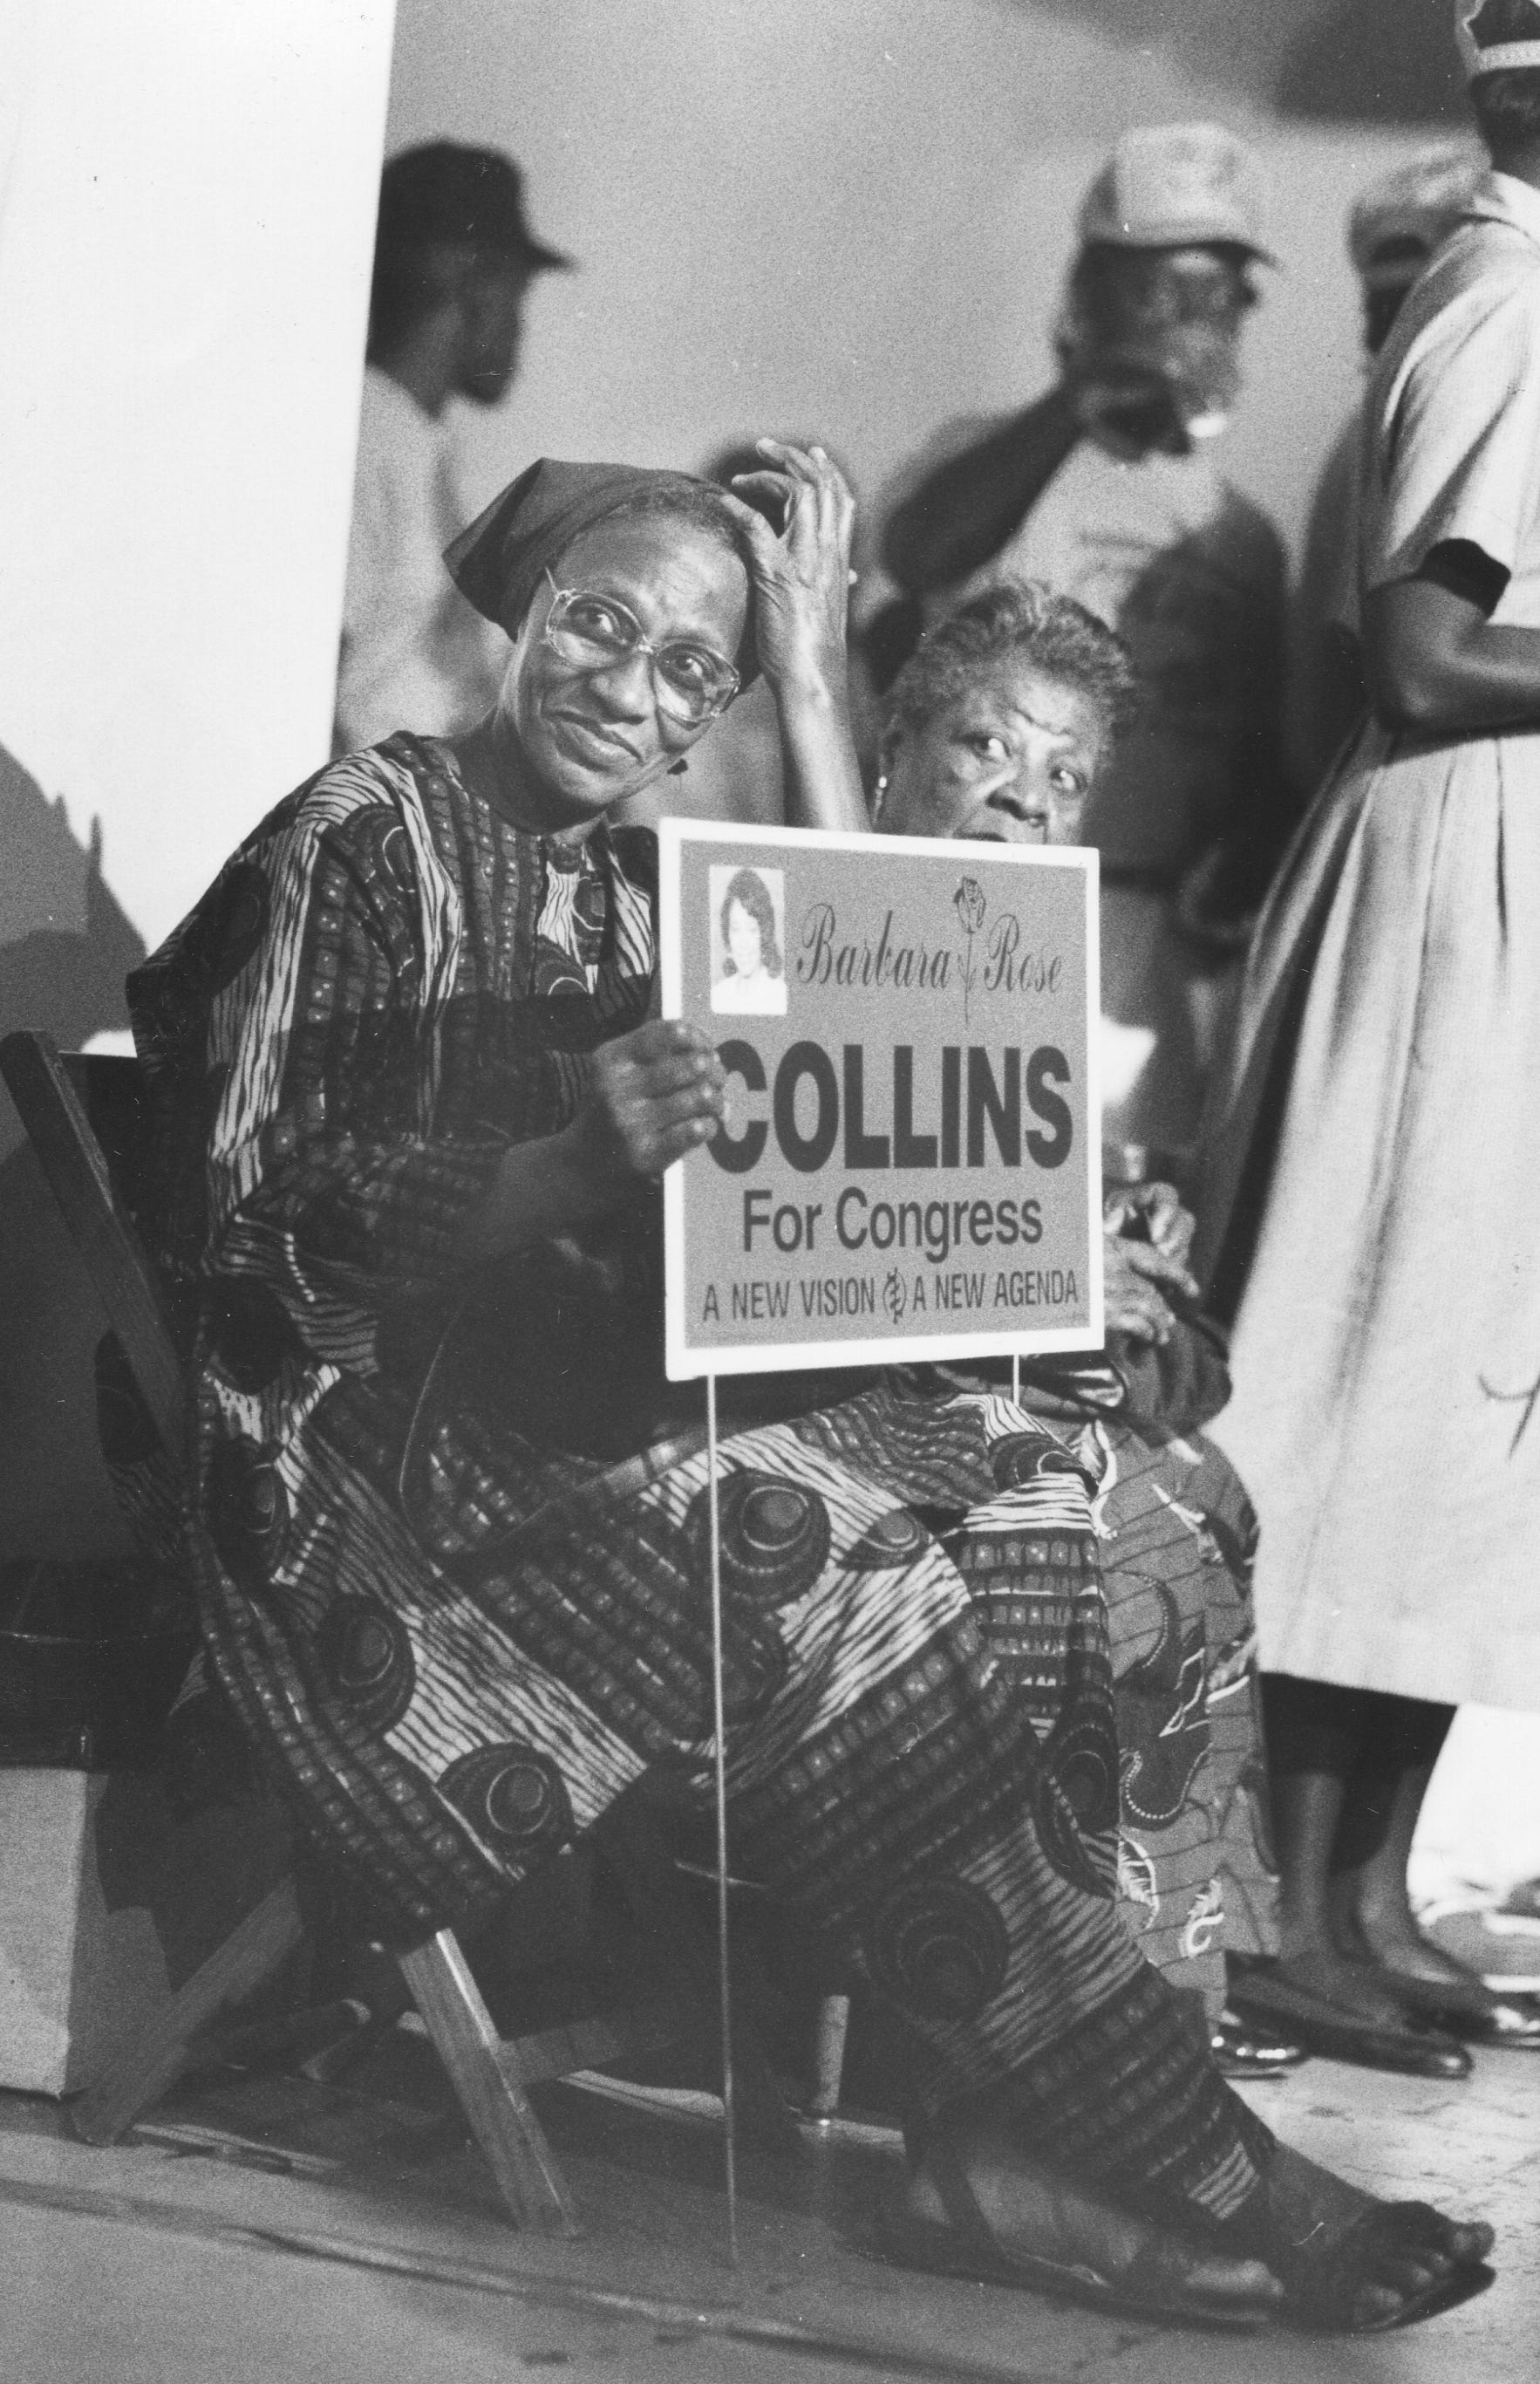 Supporters of longtime community activist and Detroit Congresswoman Barbara-Rose Collins are seen here in an Aug. 24, 1990 photo. Collins's family announced in a statement on Thursday, Nov. 4, 2021 that the 82-year-old died of COVID-19. Collins was elected to the U.S. House in 1990, becoming the first Black woman from Michigan elected to Congress.